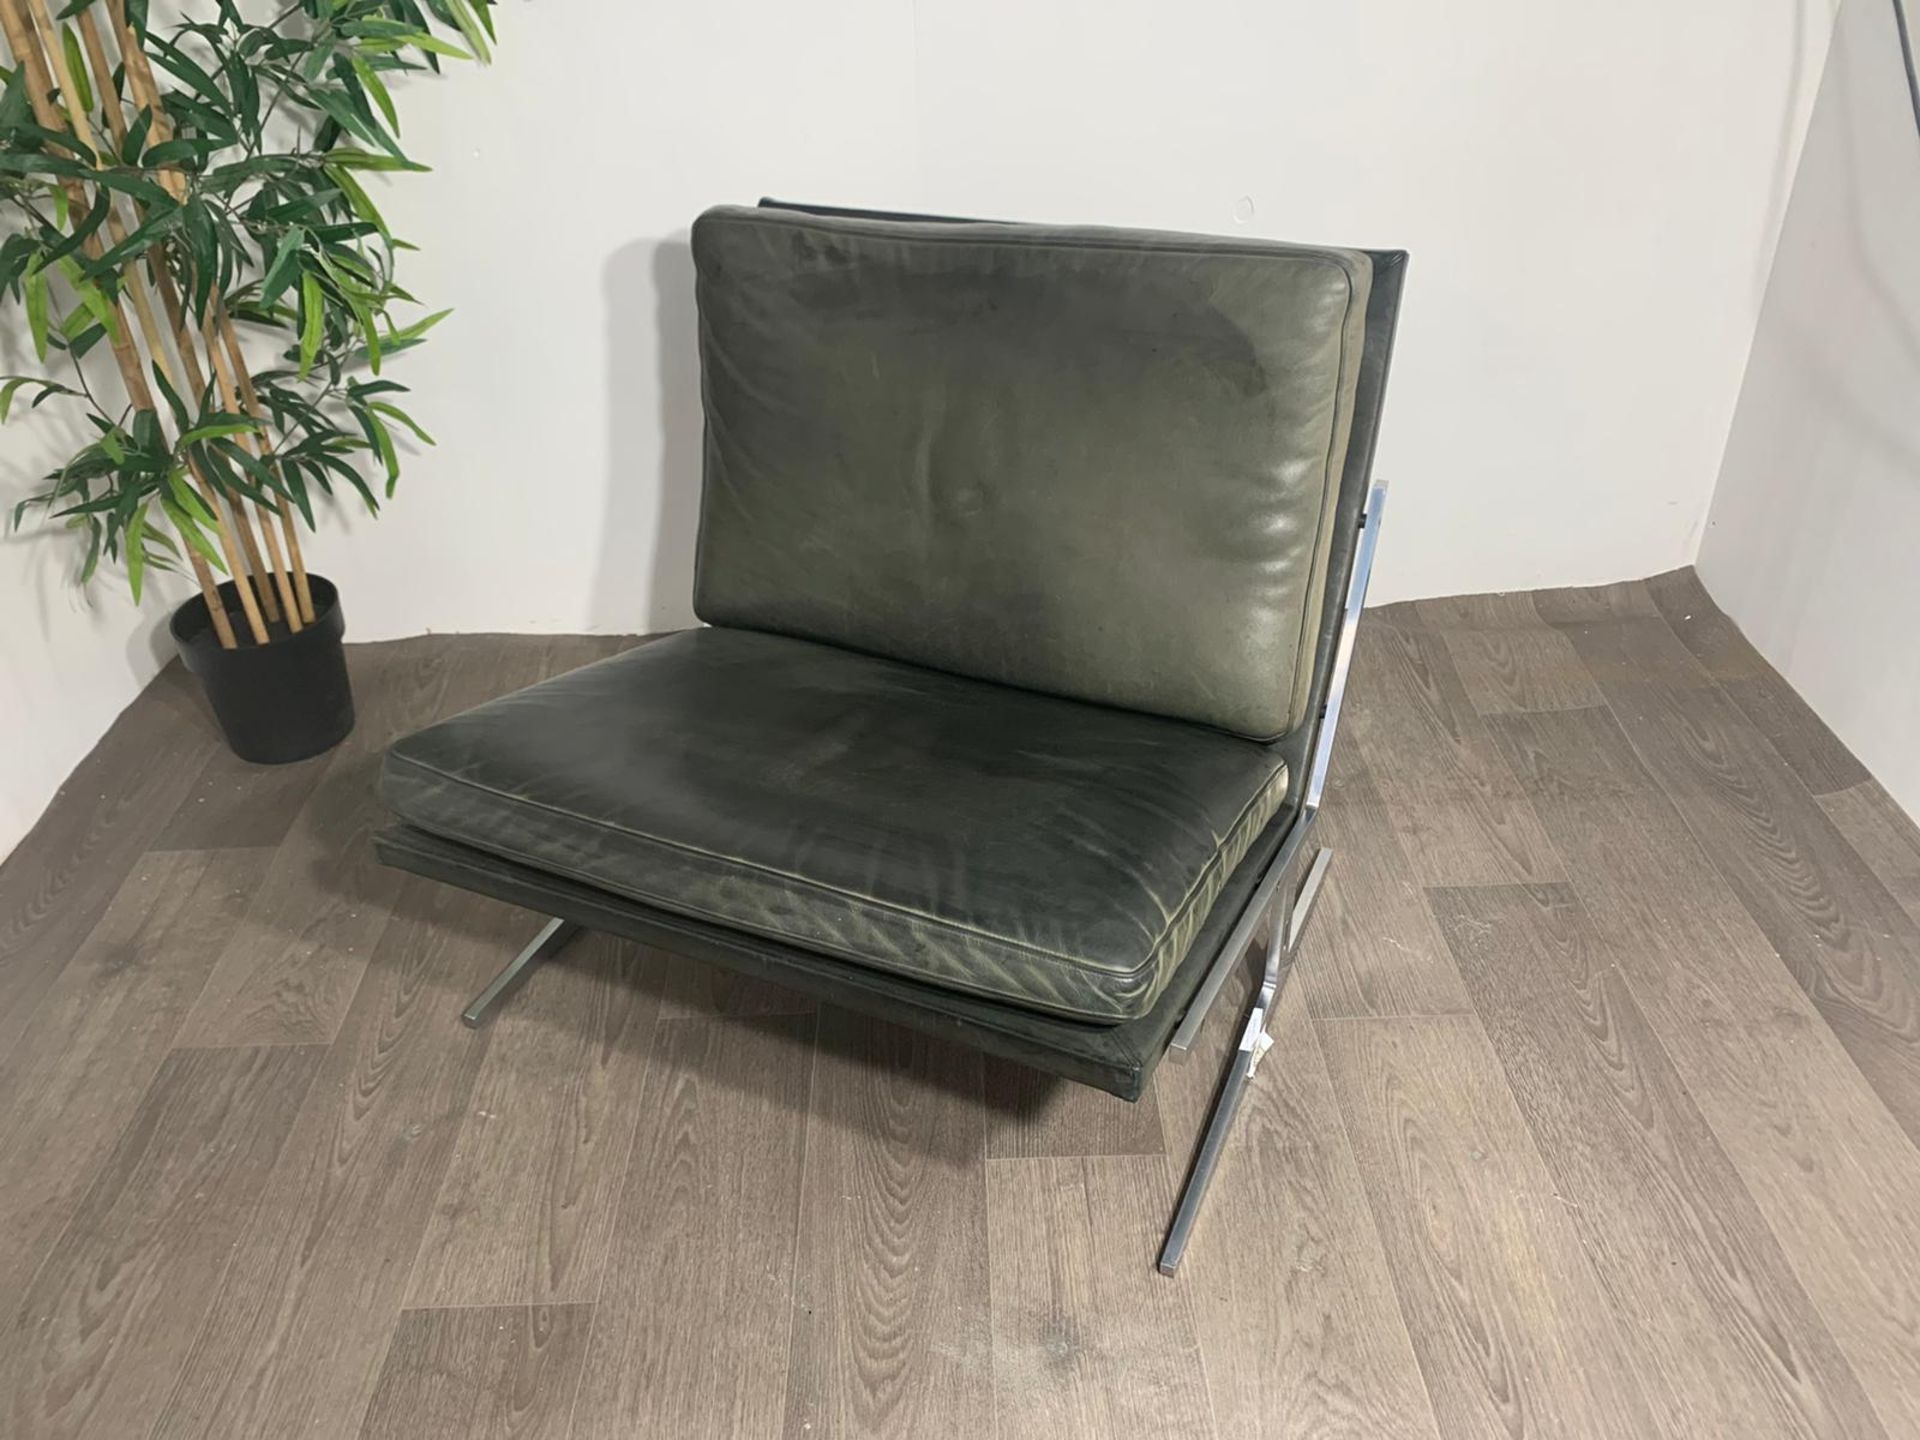 Green Leather Lounge Chair